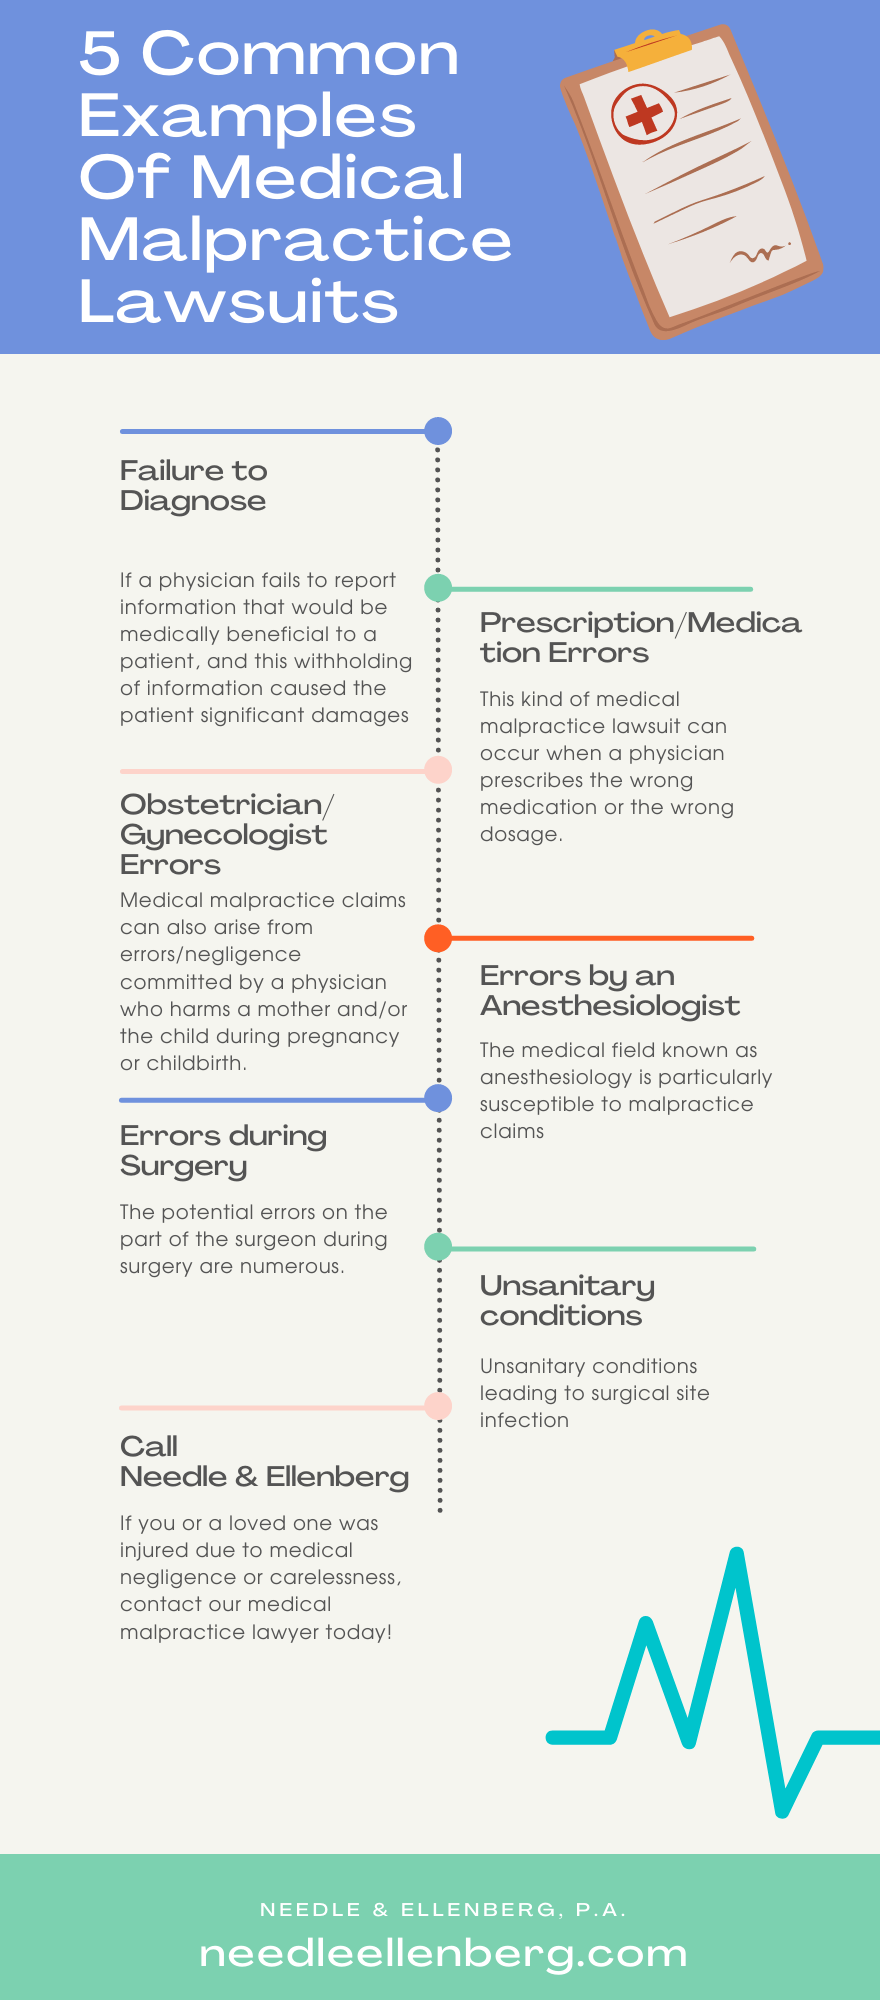 five common examples of medical malpractice lawsuits infographic